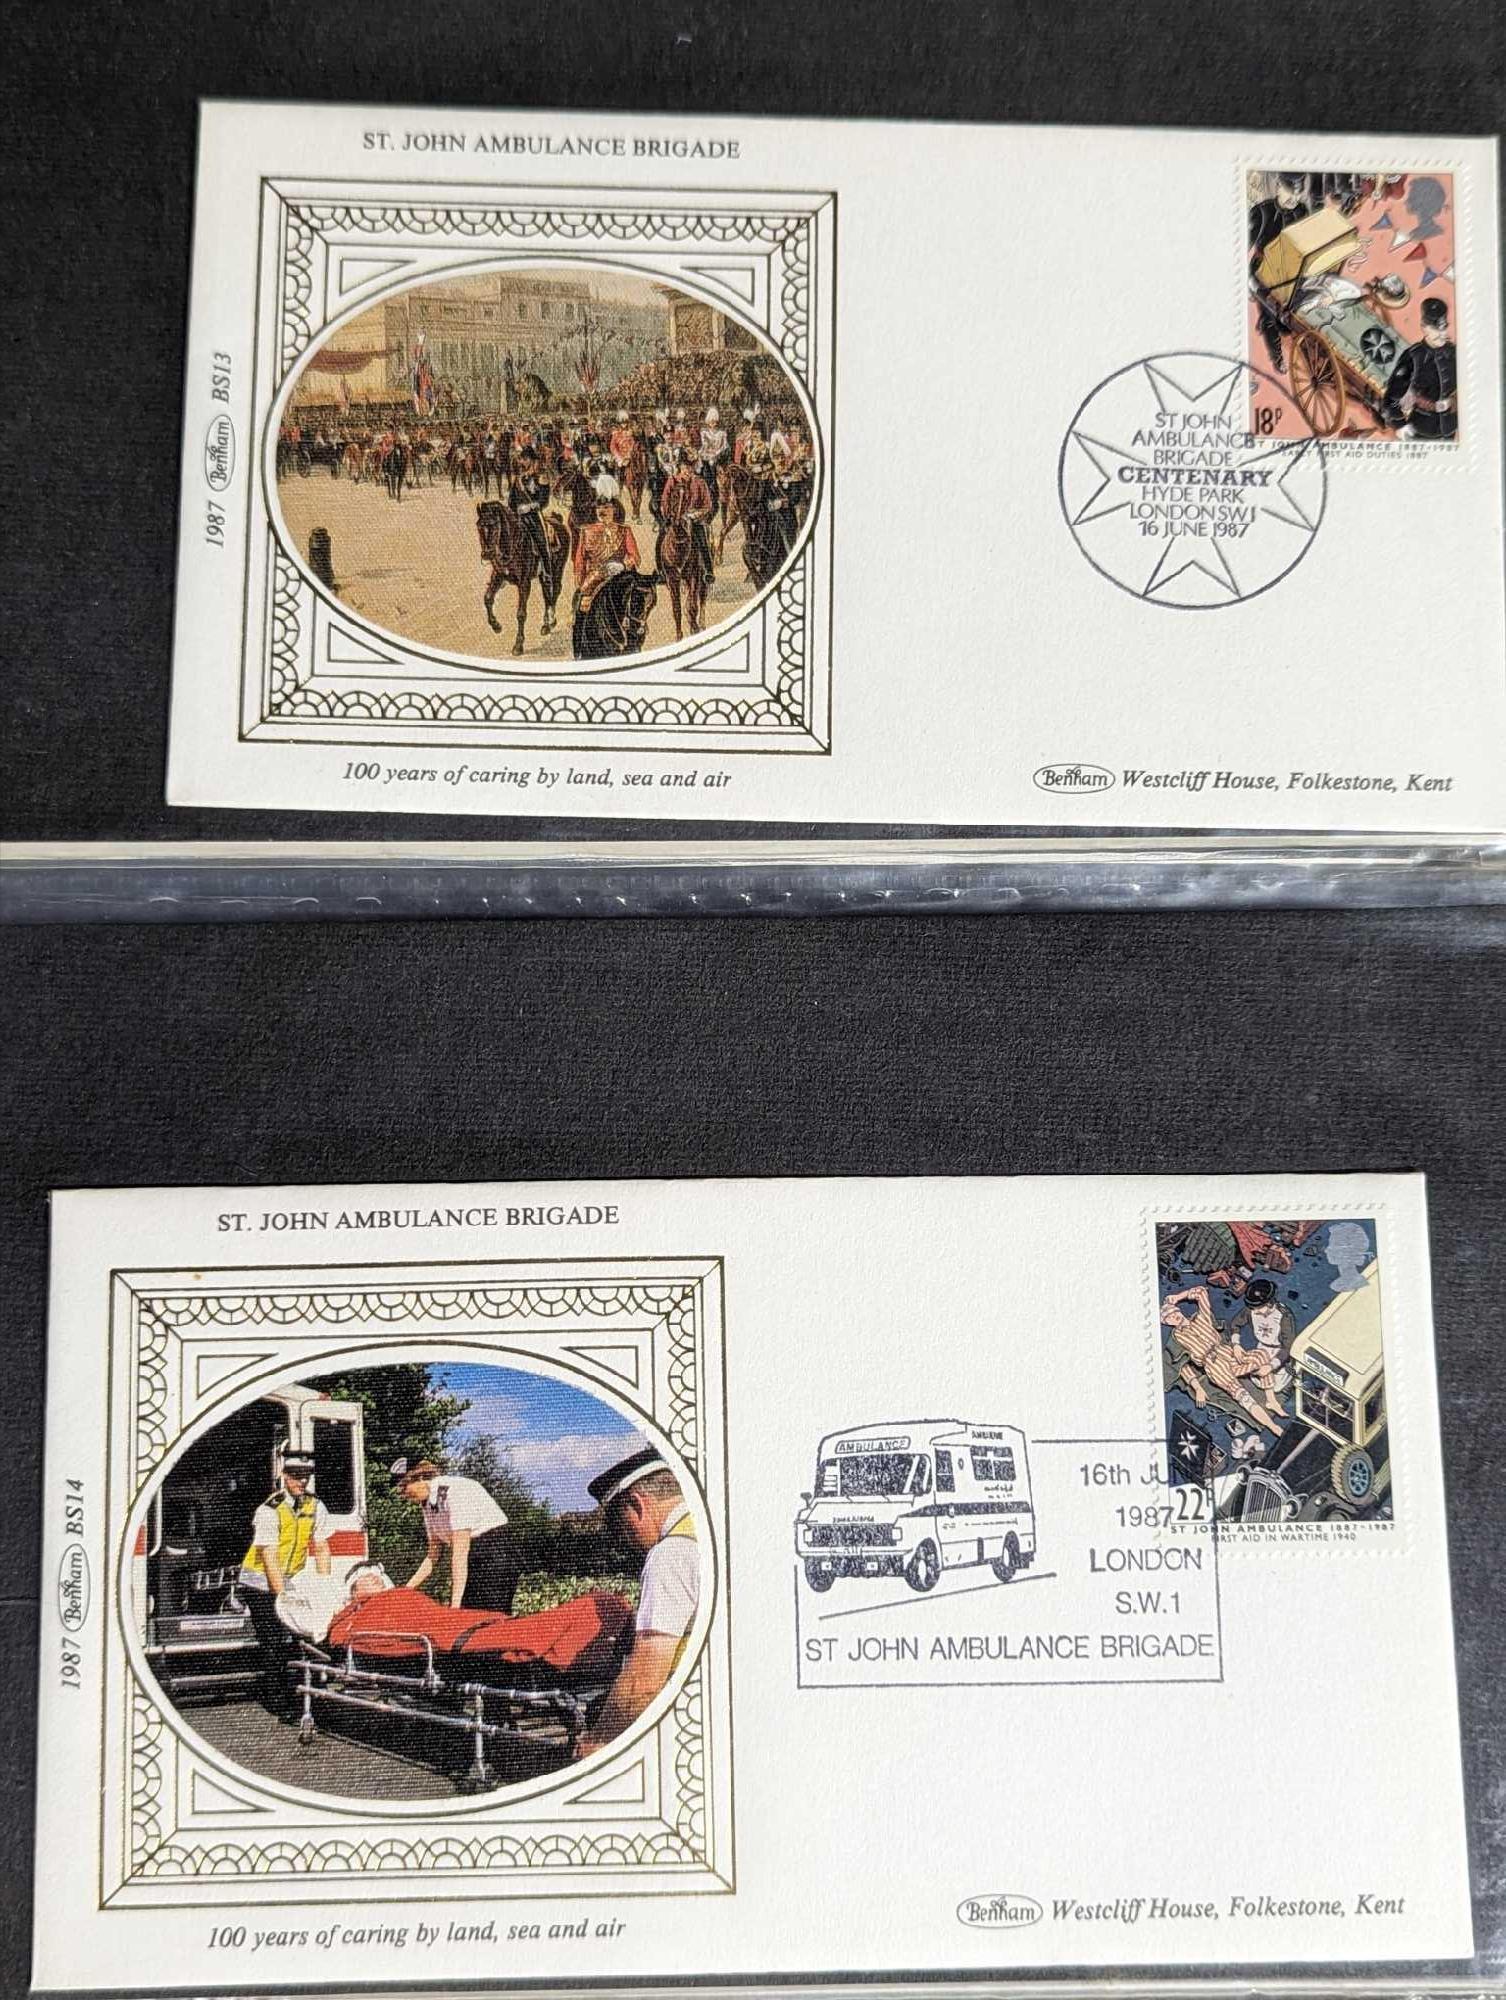 POSTAGE STAMPS - Commemorative First Day Covers c. - Image 6 of 17